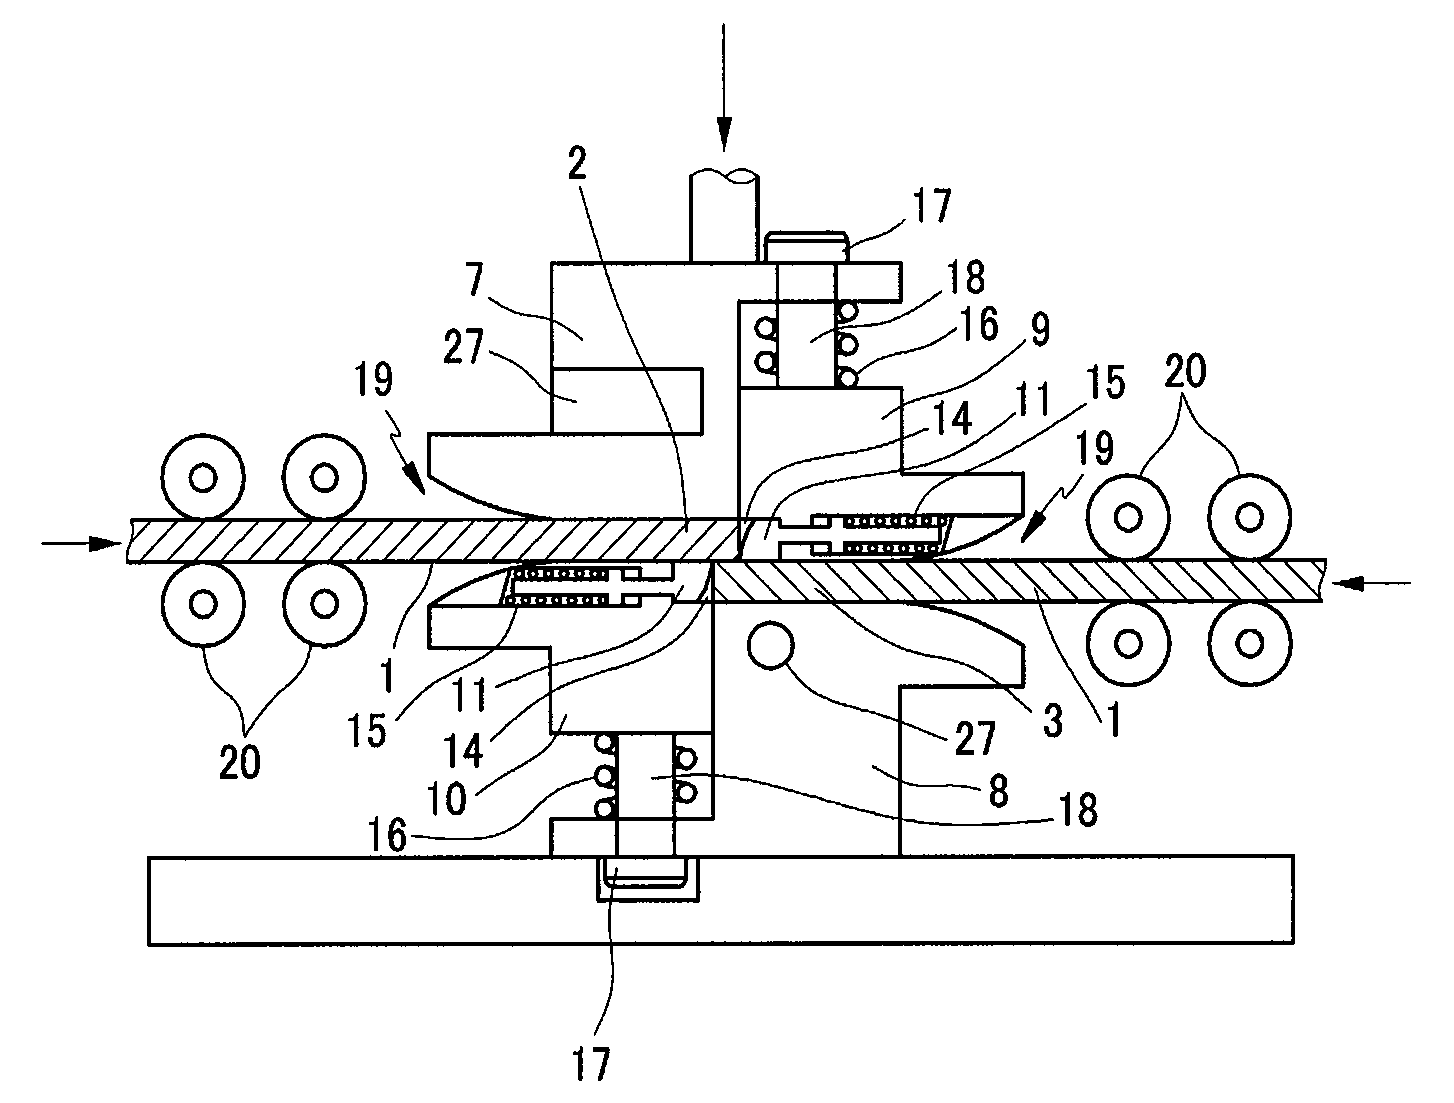 Apparatus and method for hot bonding metal plates